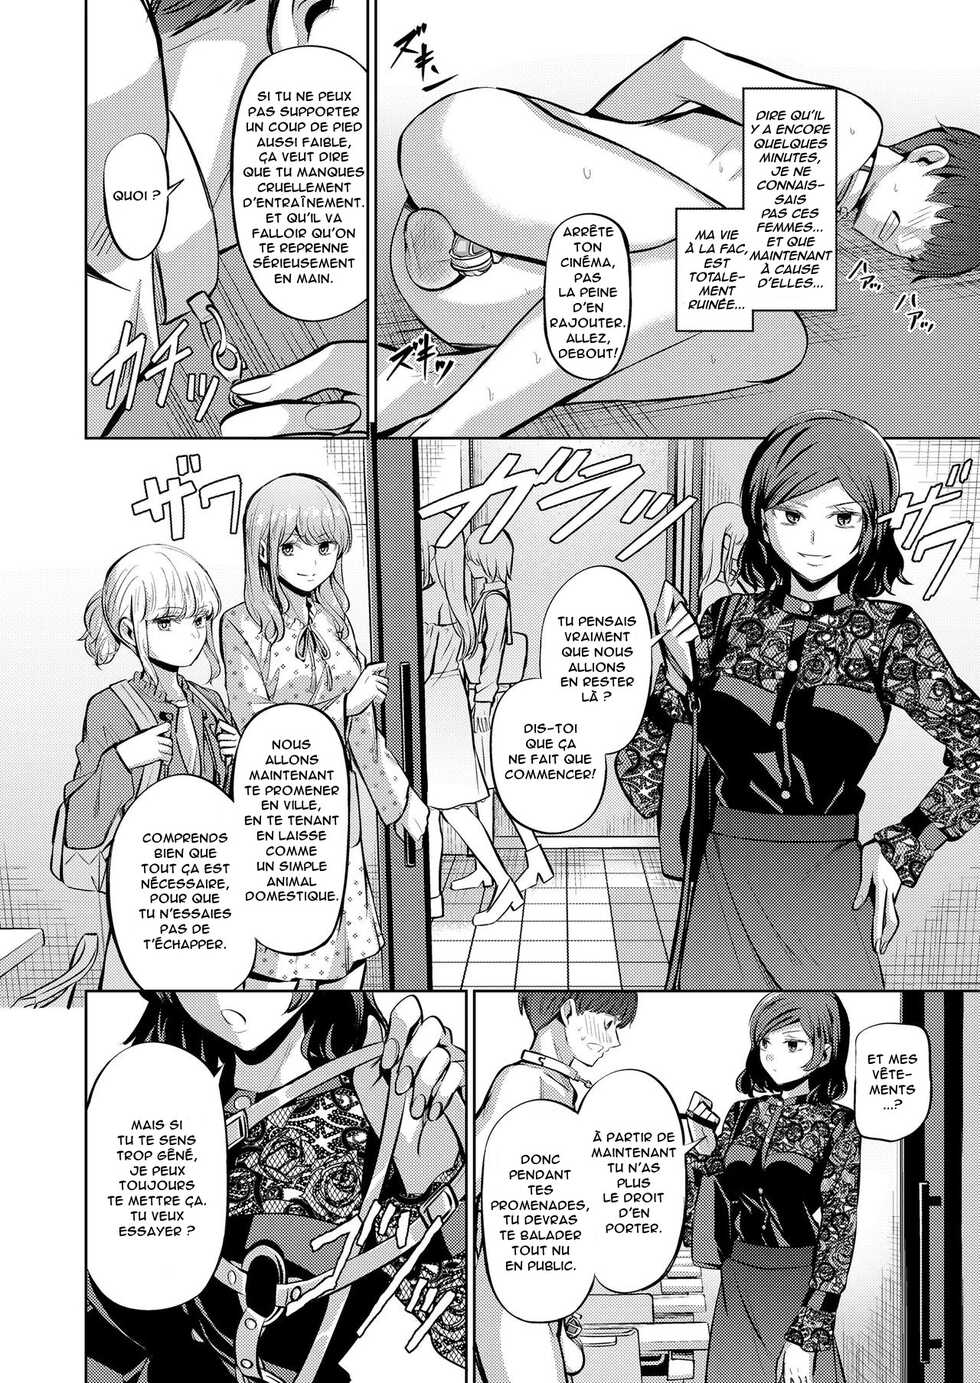 [Yamahata Rian] Tensuushugi no Kuni | A Country Based on Point System (Girls forM Vol. 20) [French] [Anatoh] [Digital] - Page 14